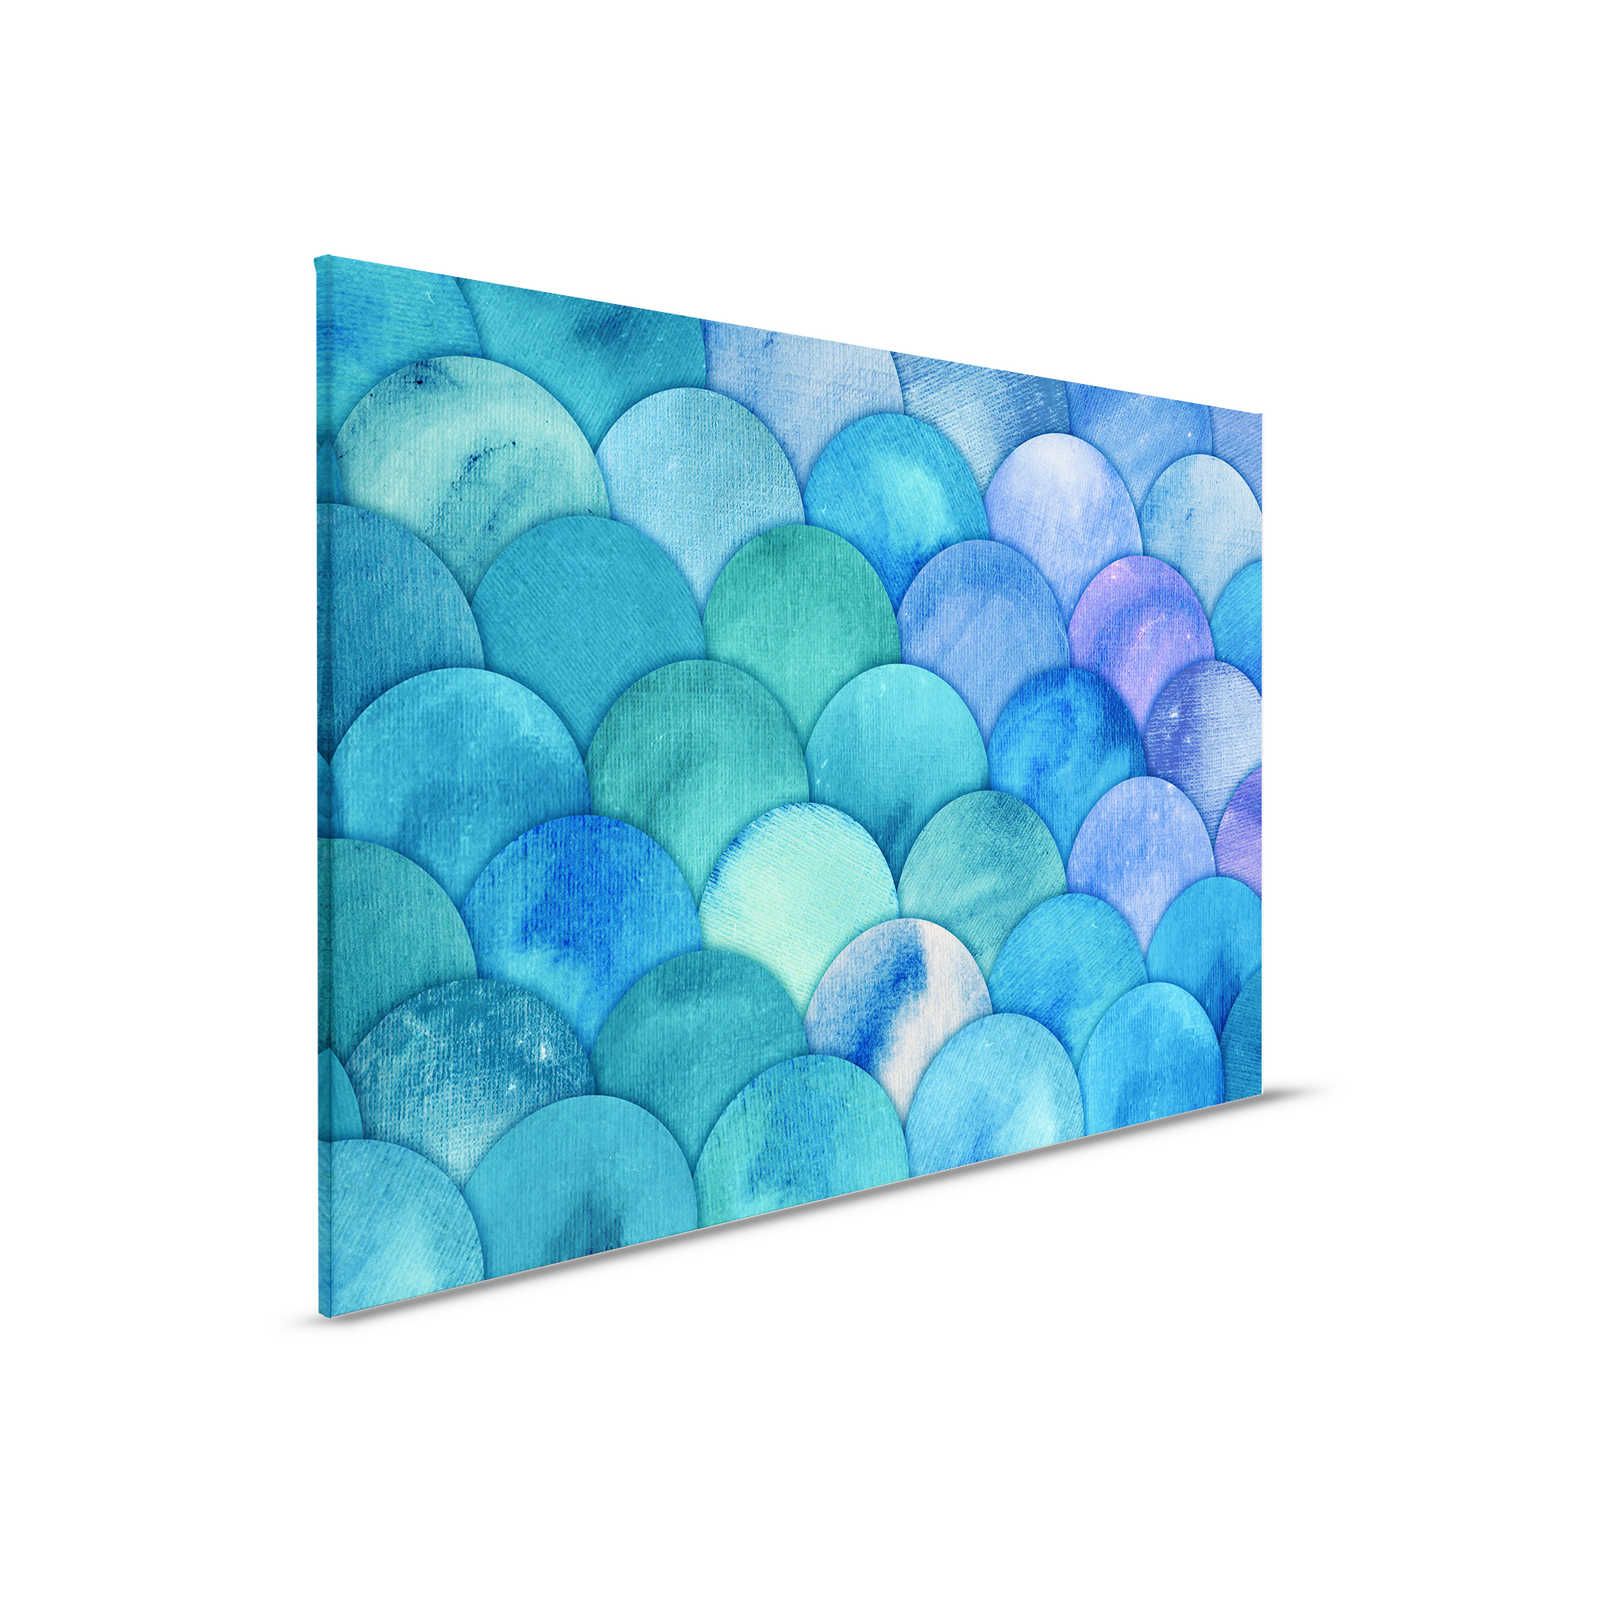         Canvas with fish scale pattern - 90 cm x 60 cm
    